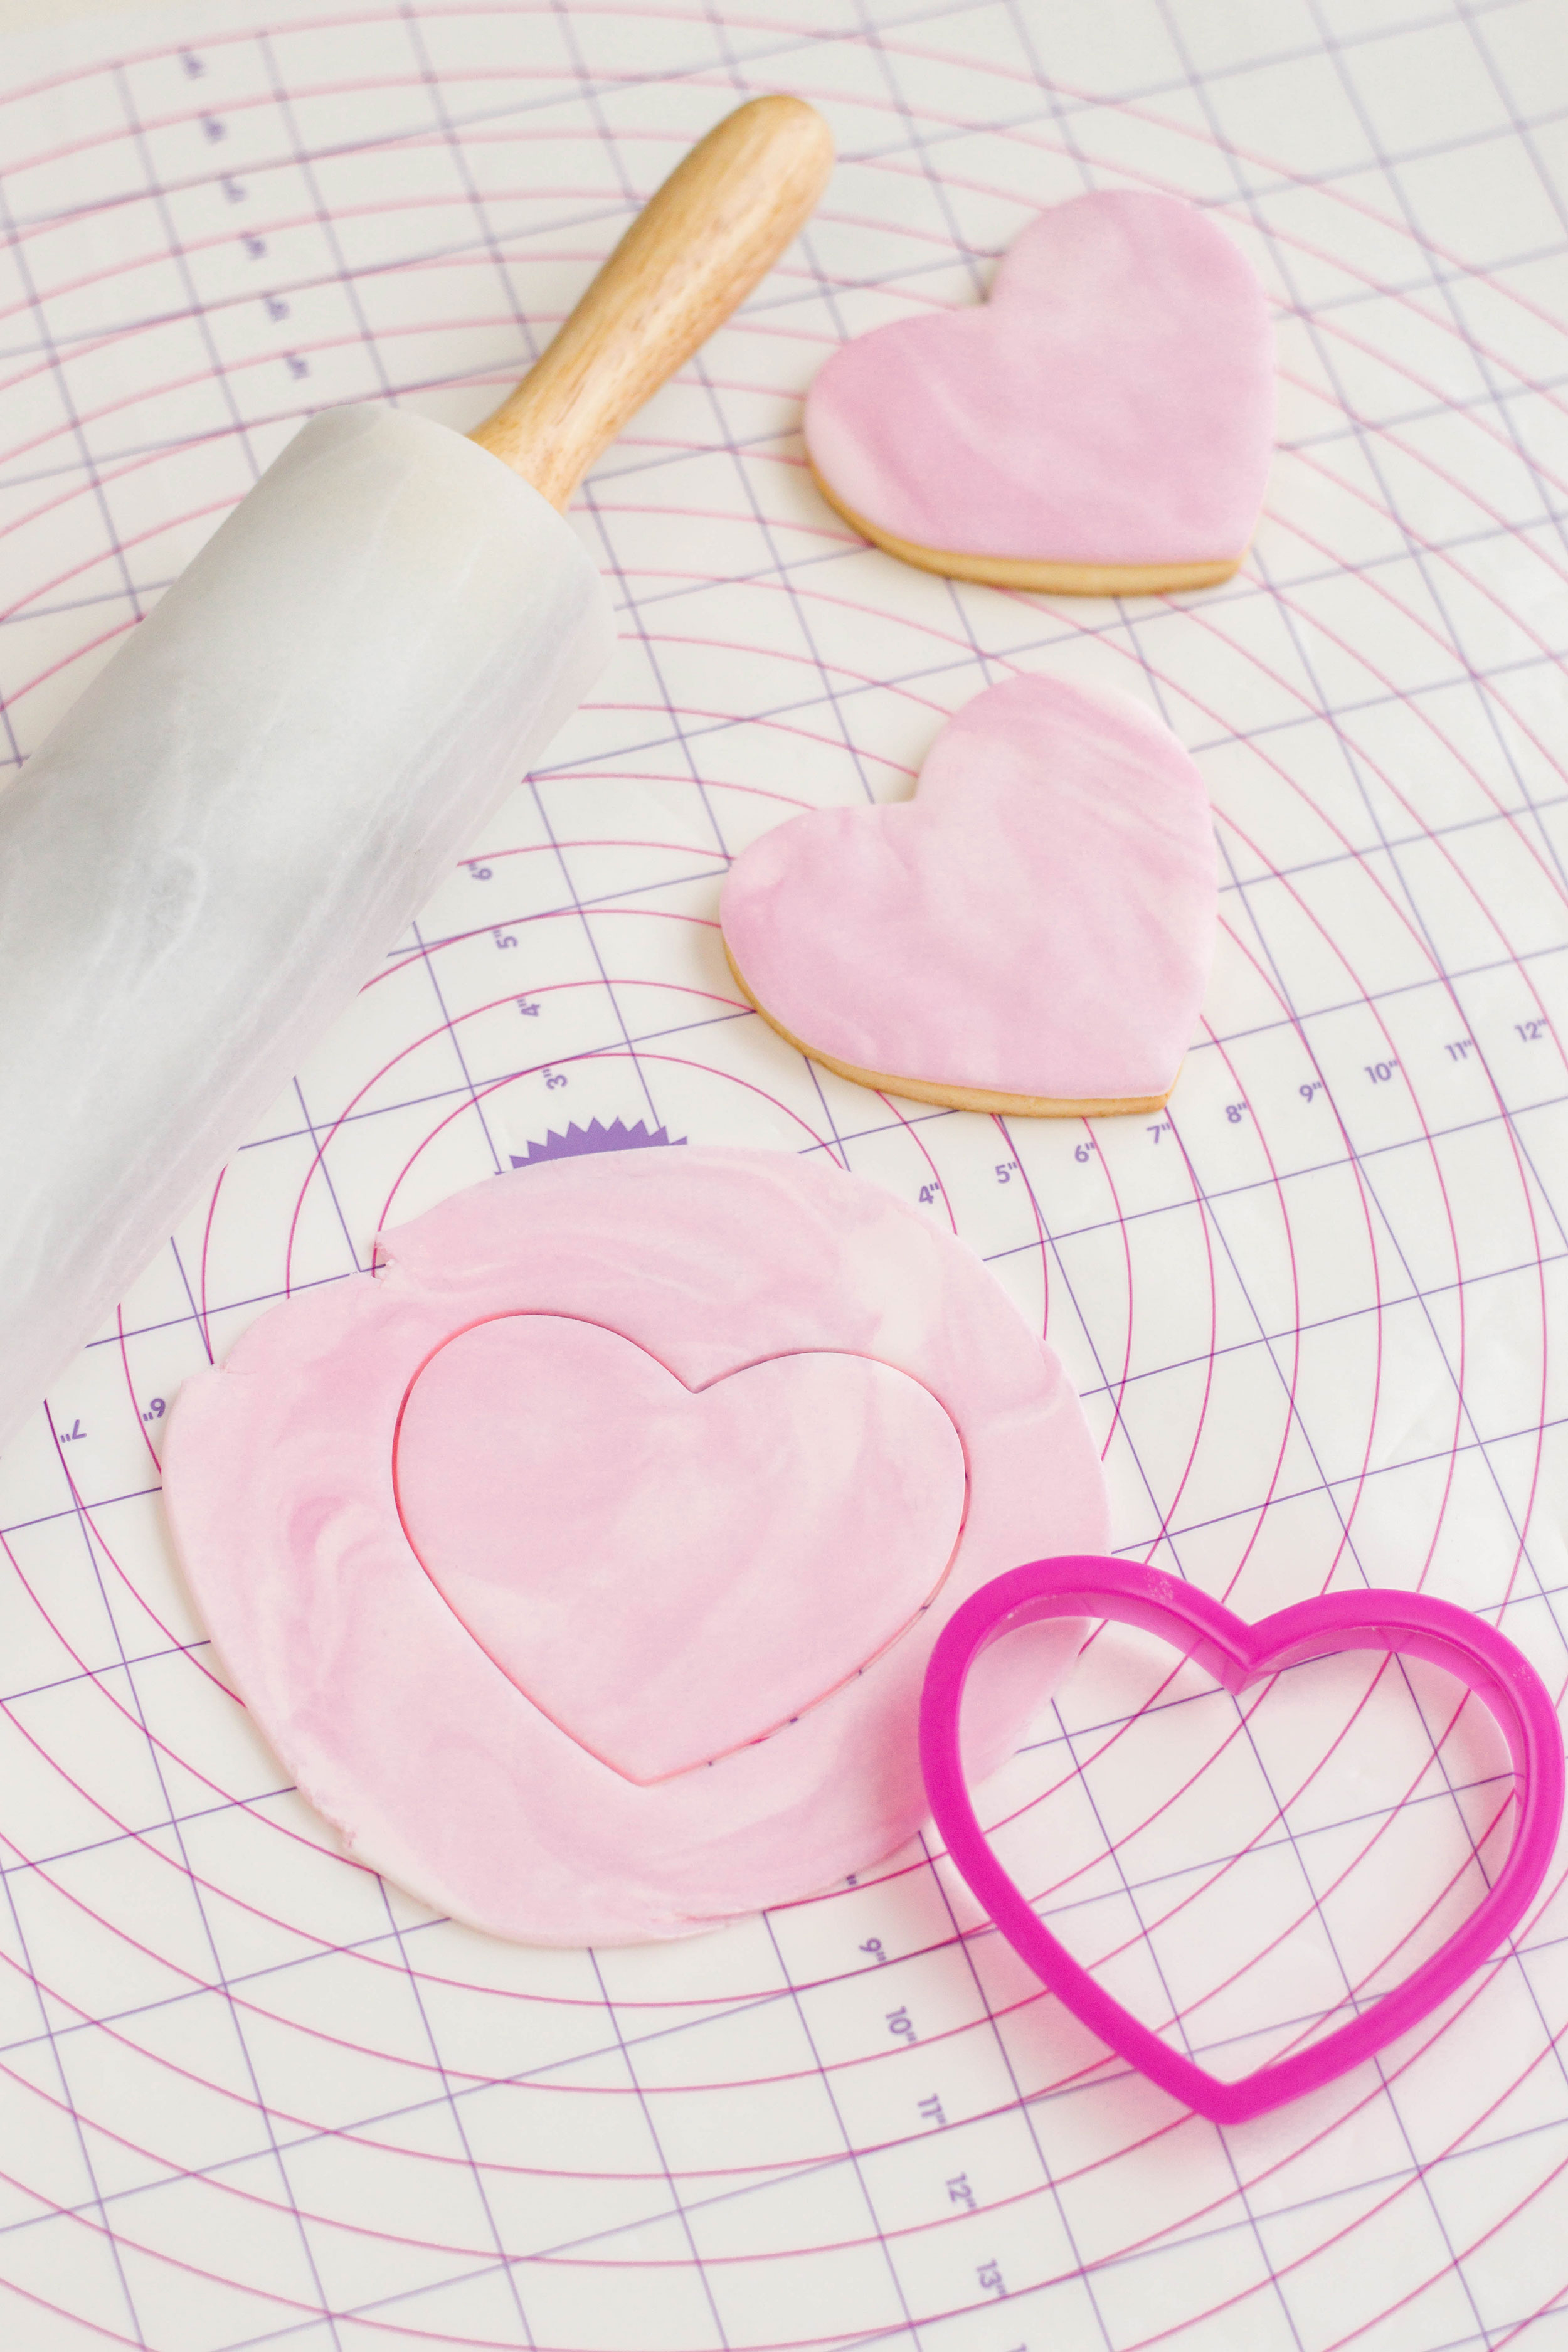 Too cute, these are. Celebrate Valentine's Day with these ultra cute heart-shaped Yoda Sugar Cookies. The force can be romantic, too! #valentinesdayrecipes #starwarscookies